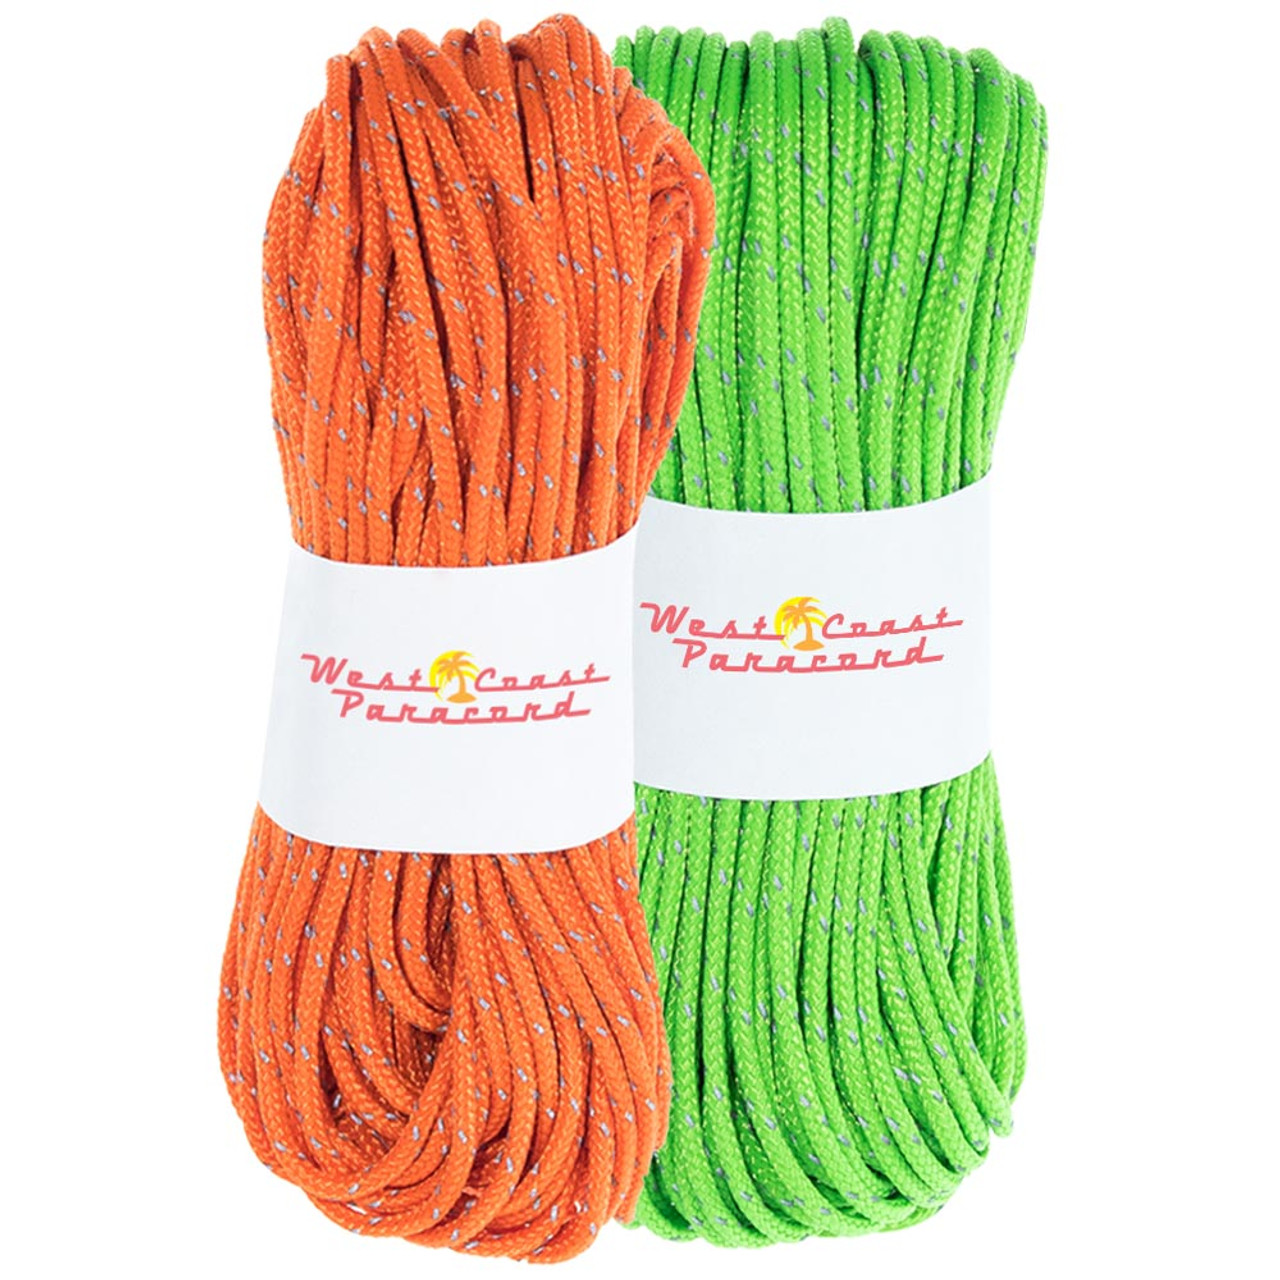 2 Pack 95 Reflective Cord - 20M each - Neon Green and Neon Orange